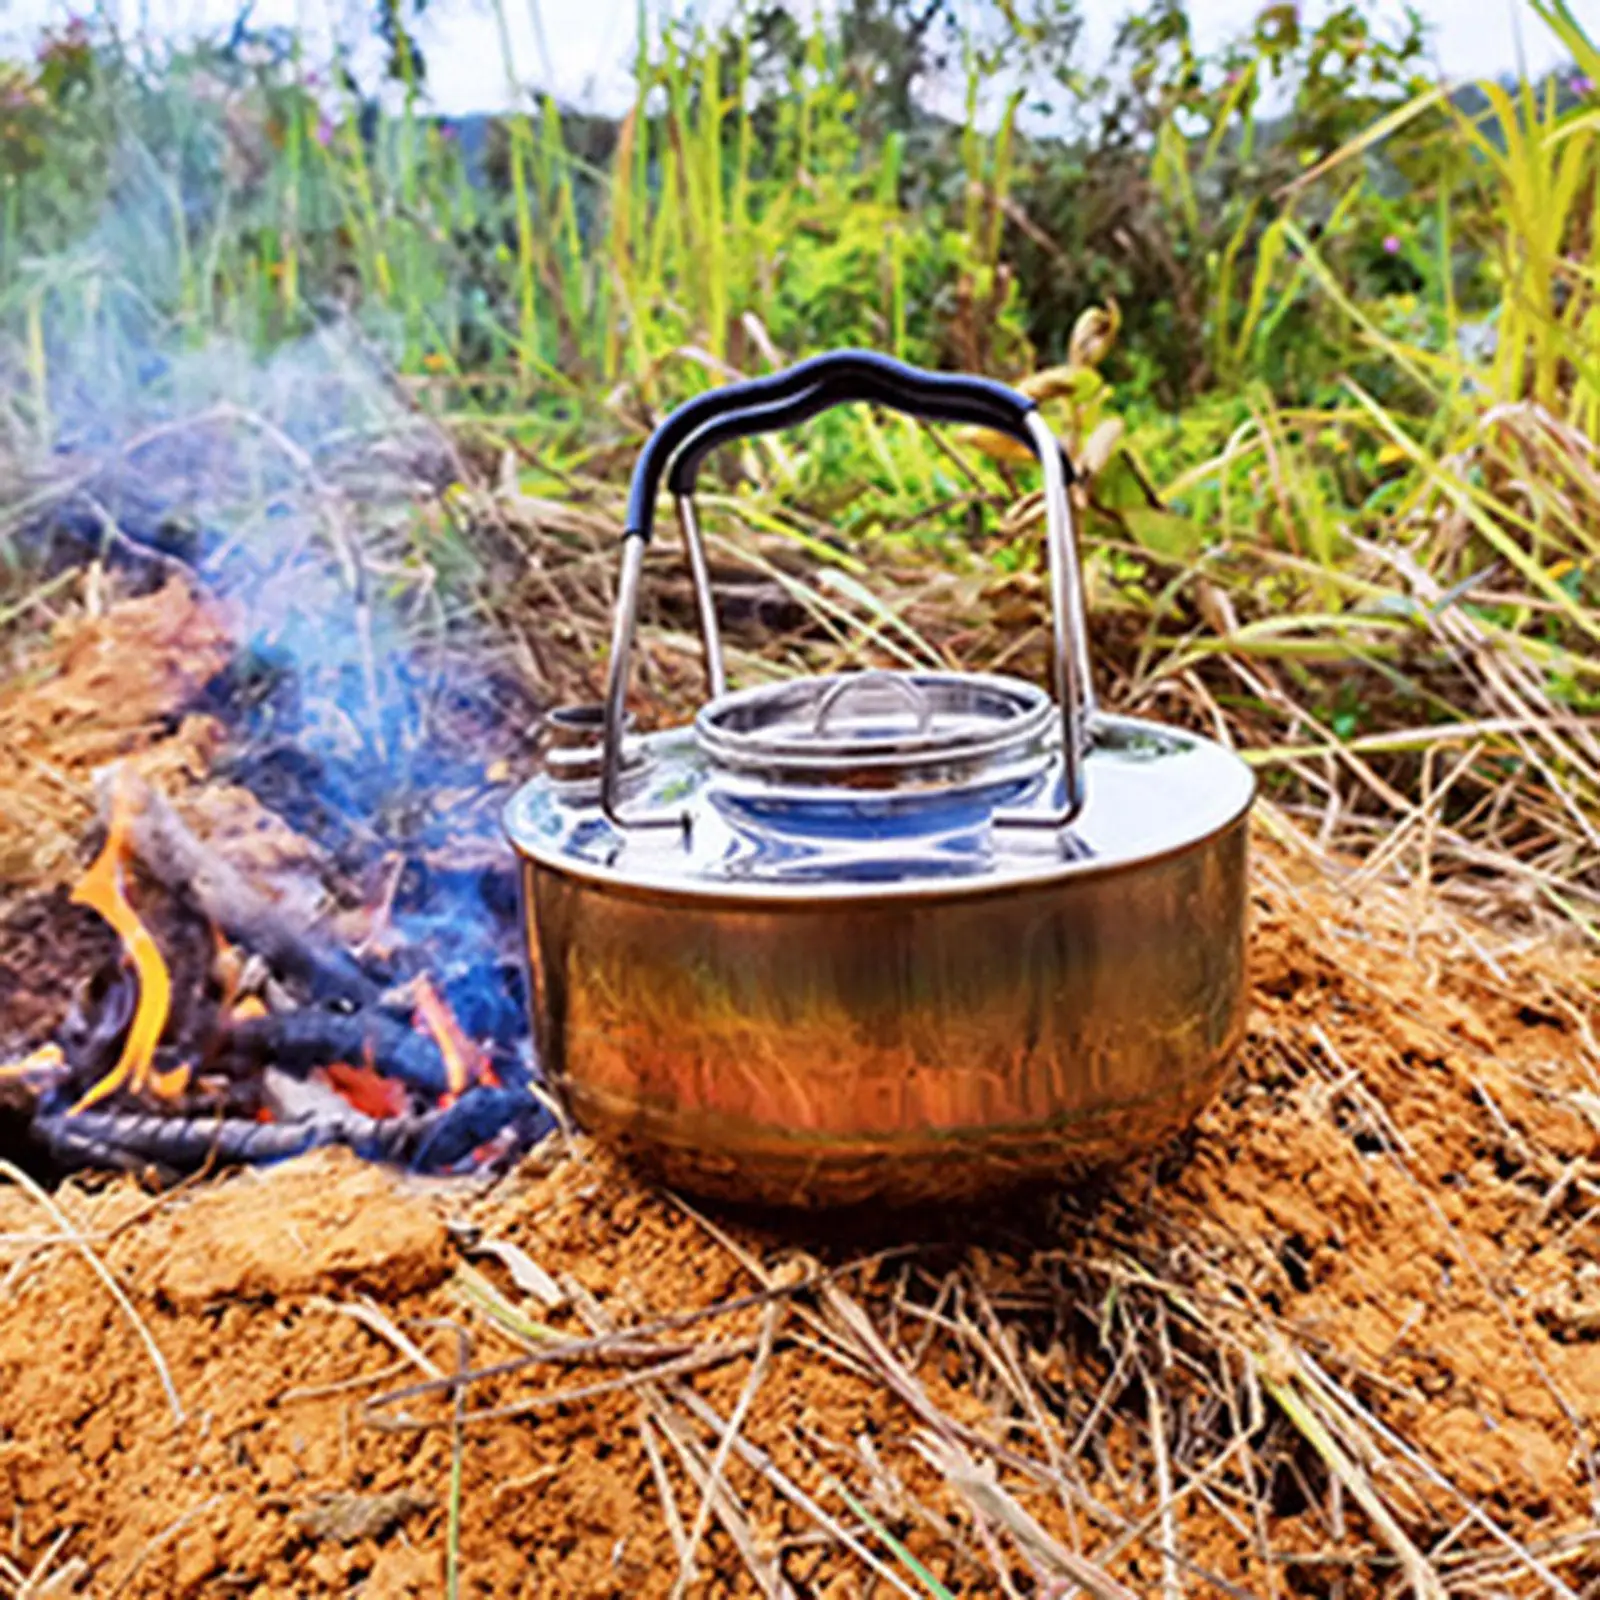 Portable Camping Kettle Tea Pot Outdoor Kettle Cookware Water Kettle Campfire Kettle for Backpacking Hiking Outdoor Picnic